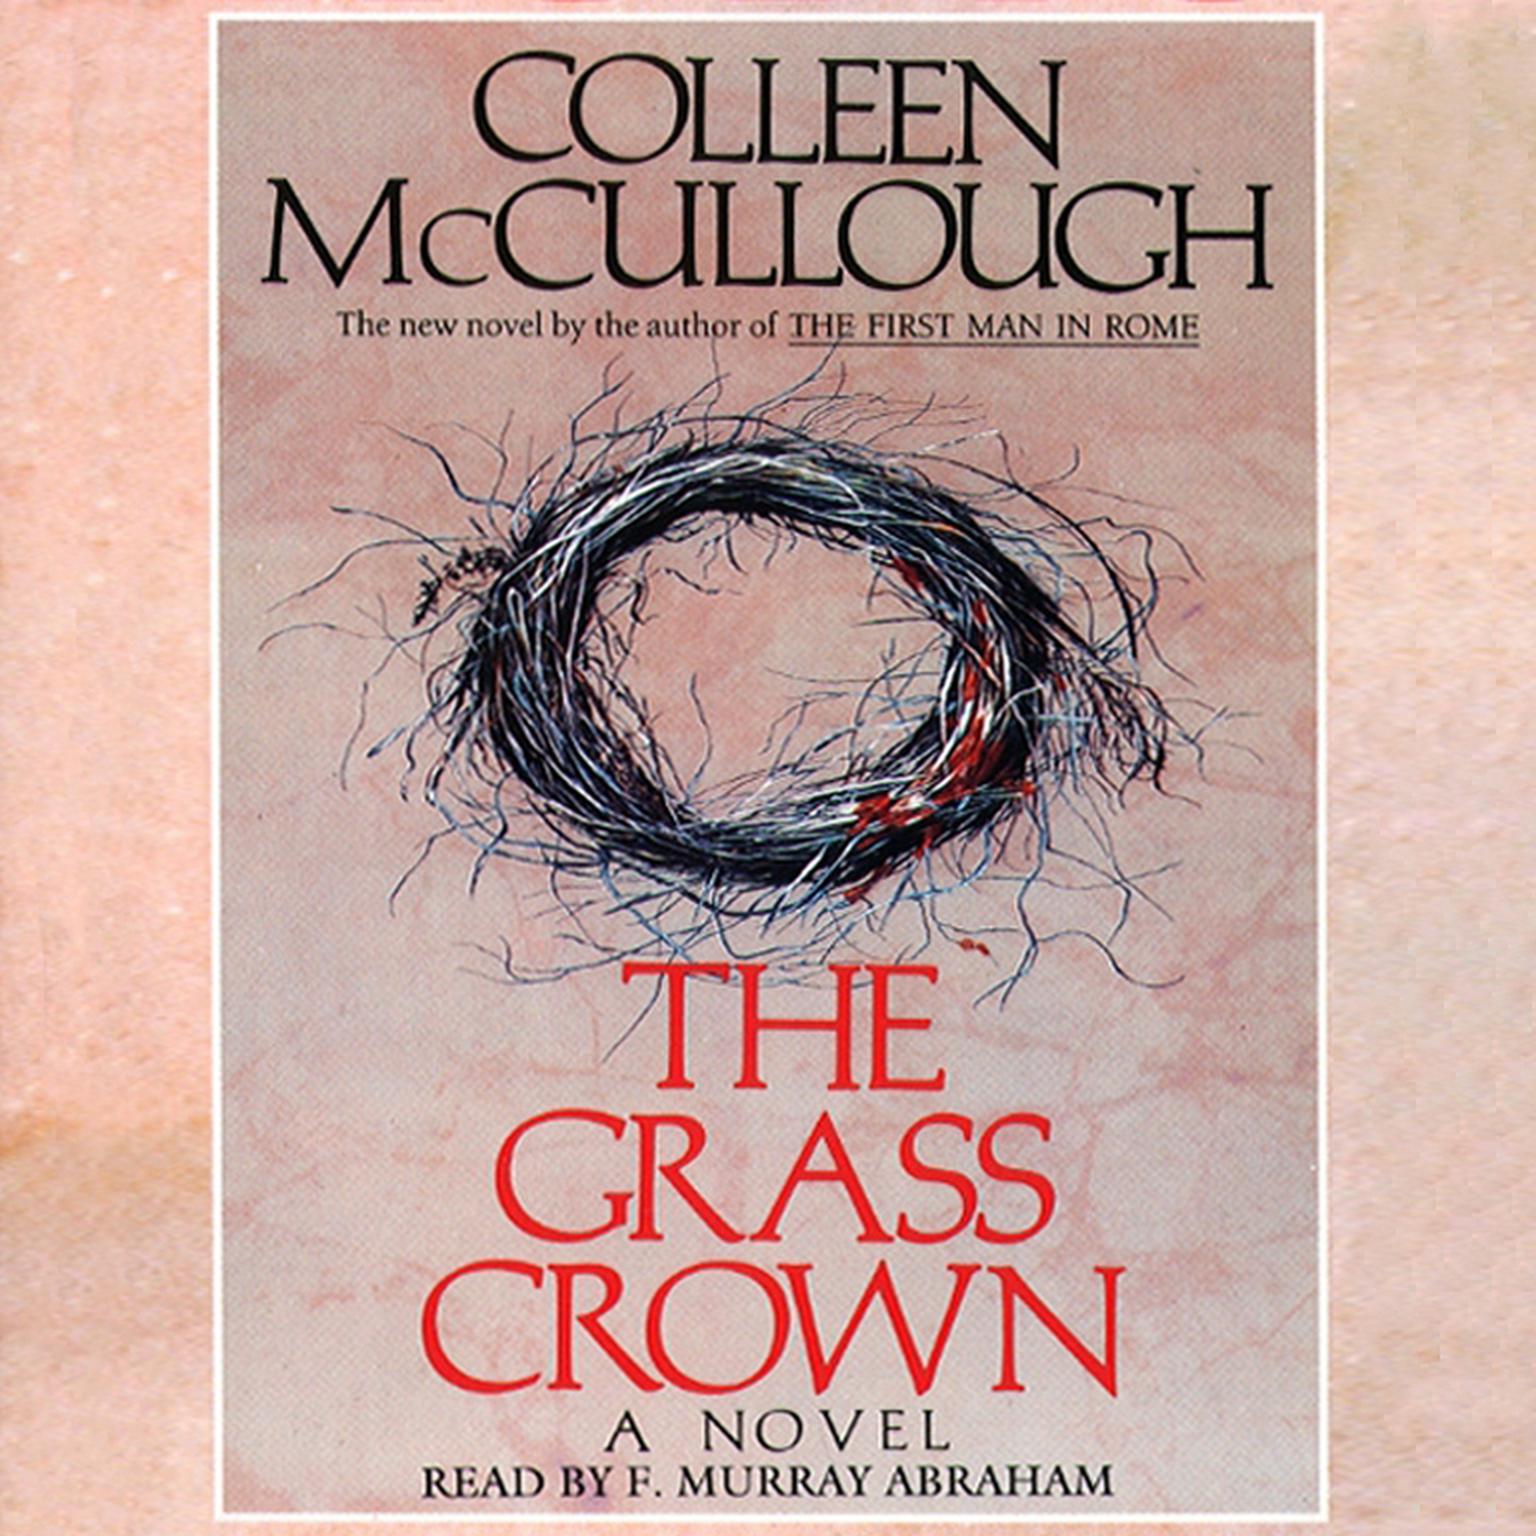 The Grass Crown (Abridged) Audiobook, by Colleen McCullough